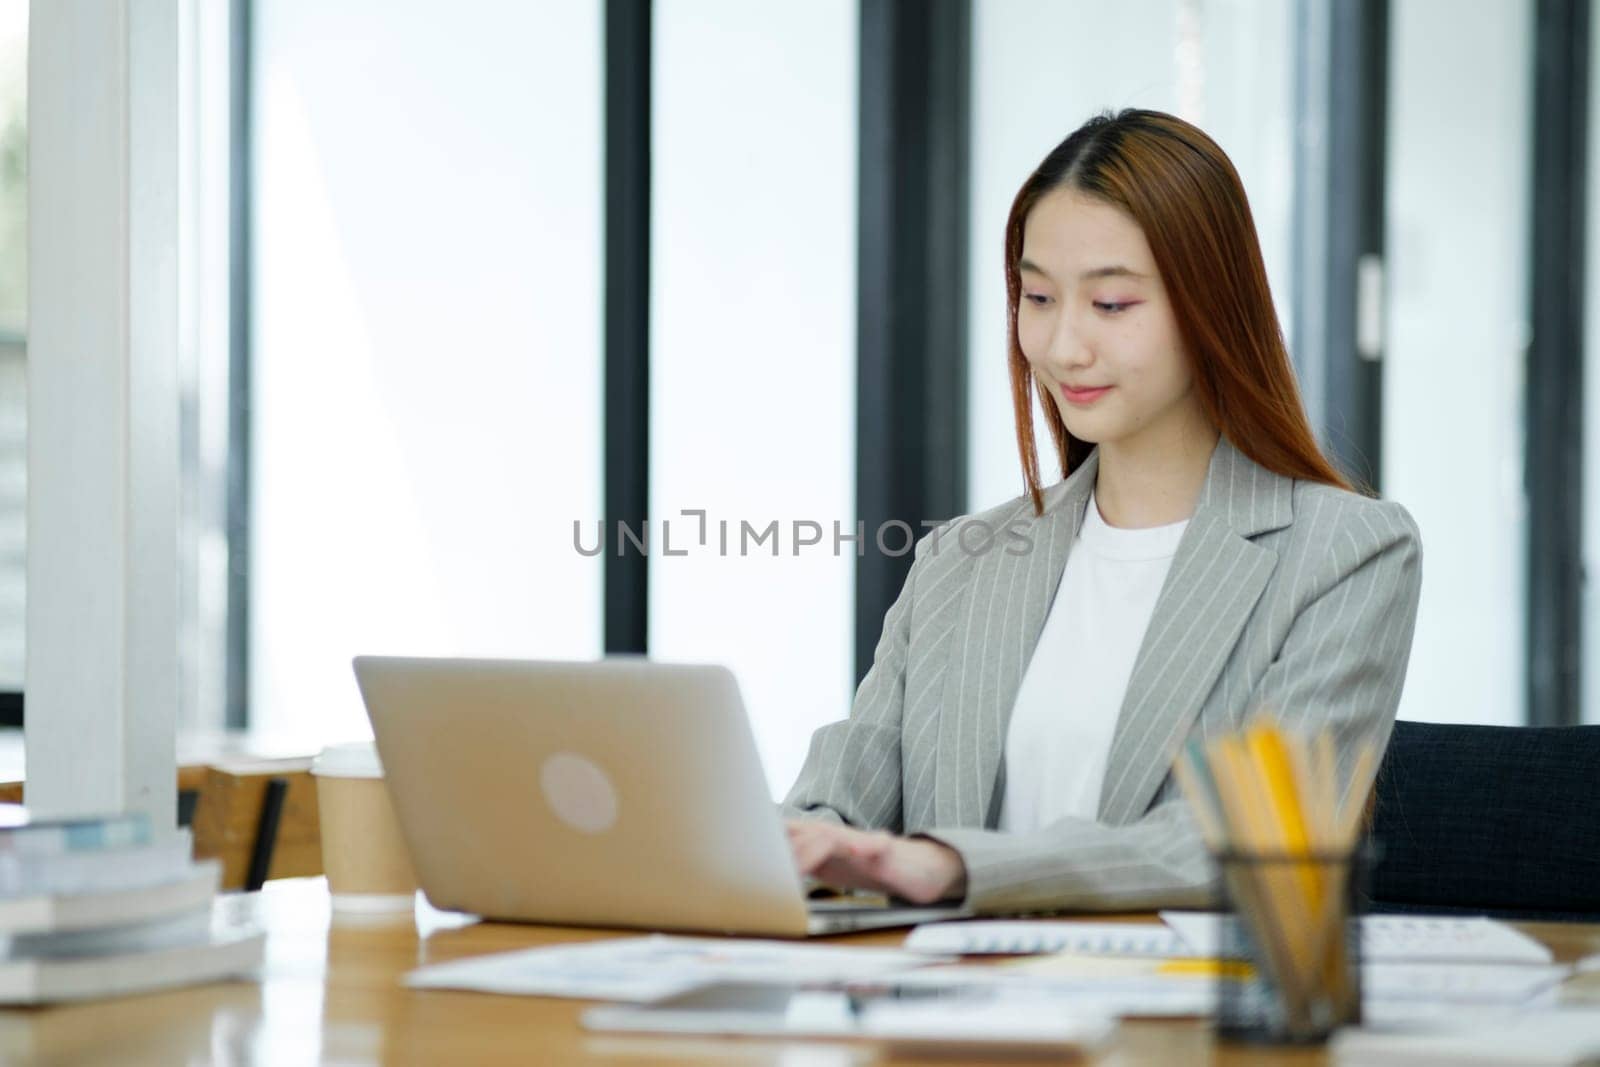 Business woman sitting working on her notebook with confidence and happiness doing a great job.